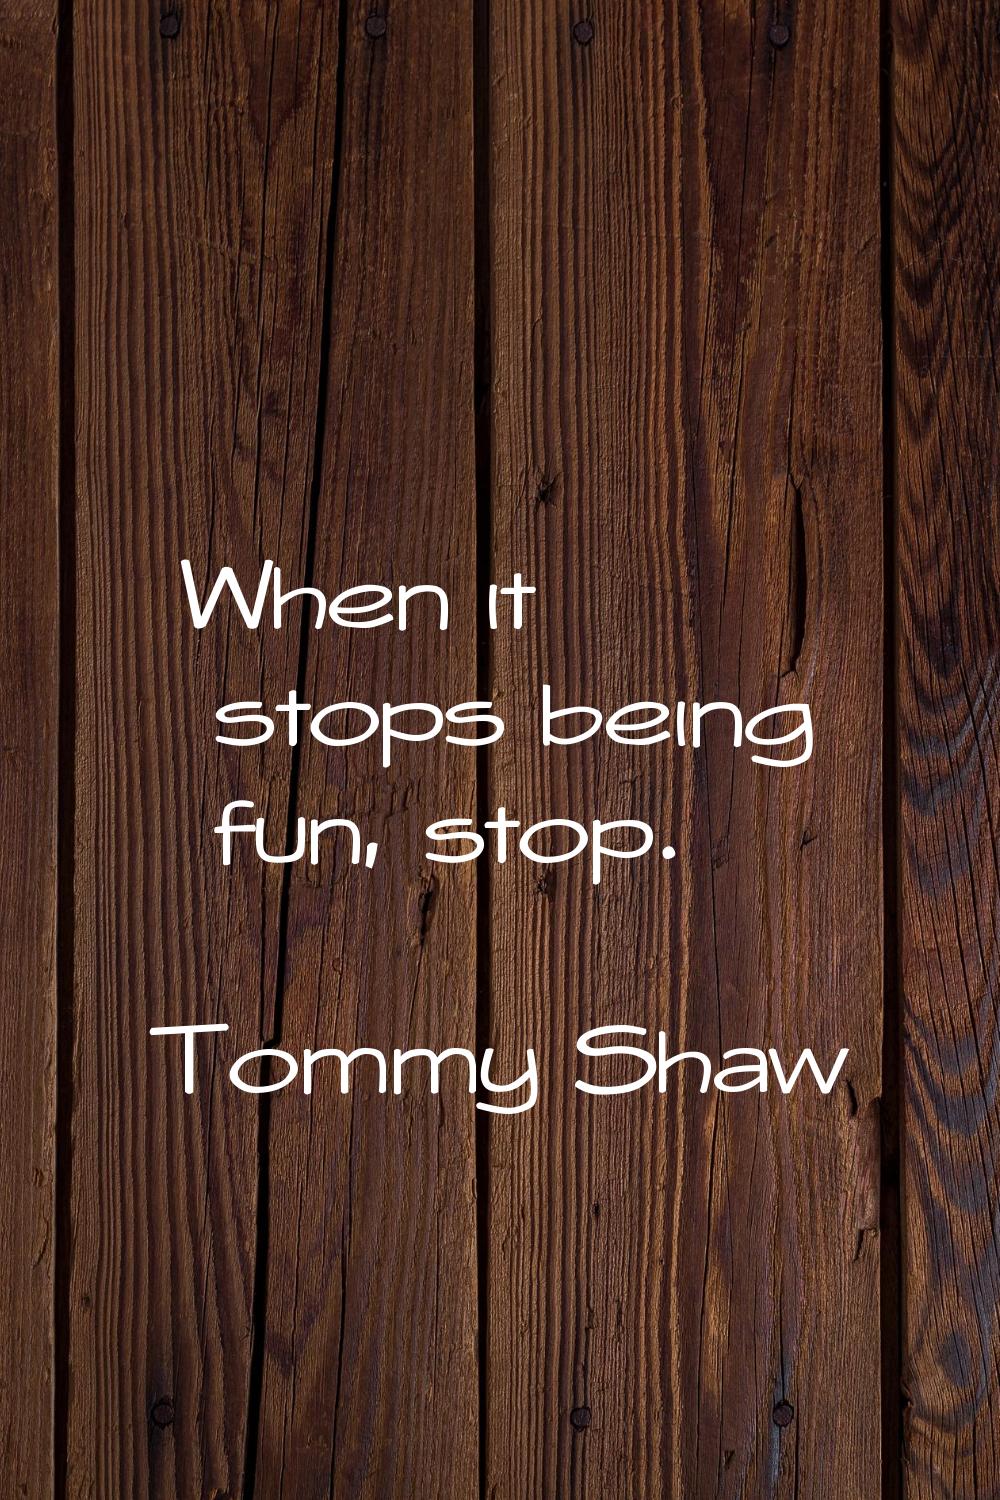 When it stops being fun, stop.